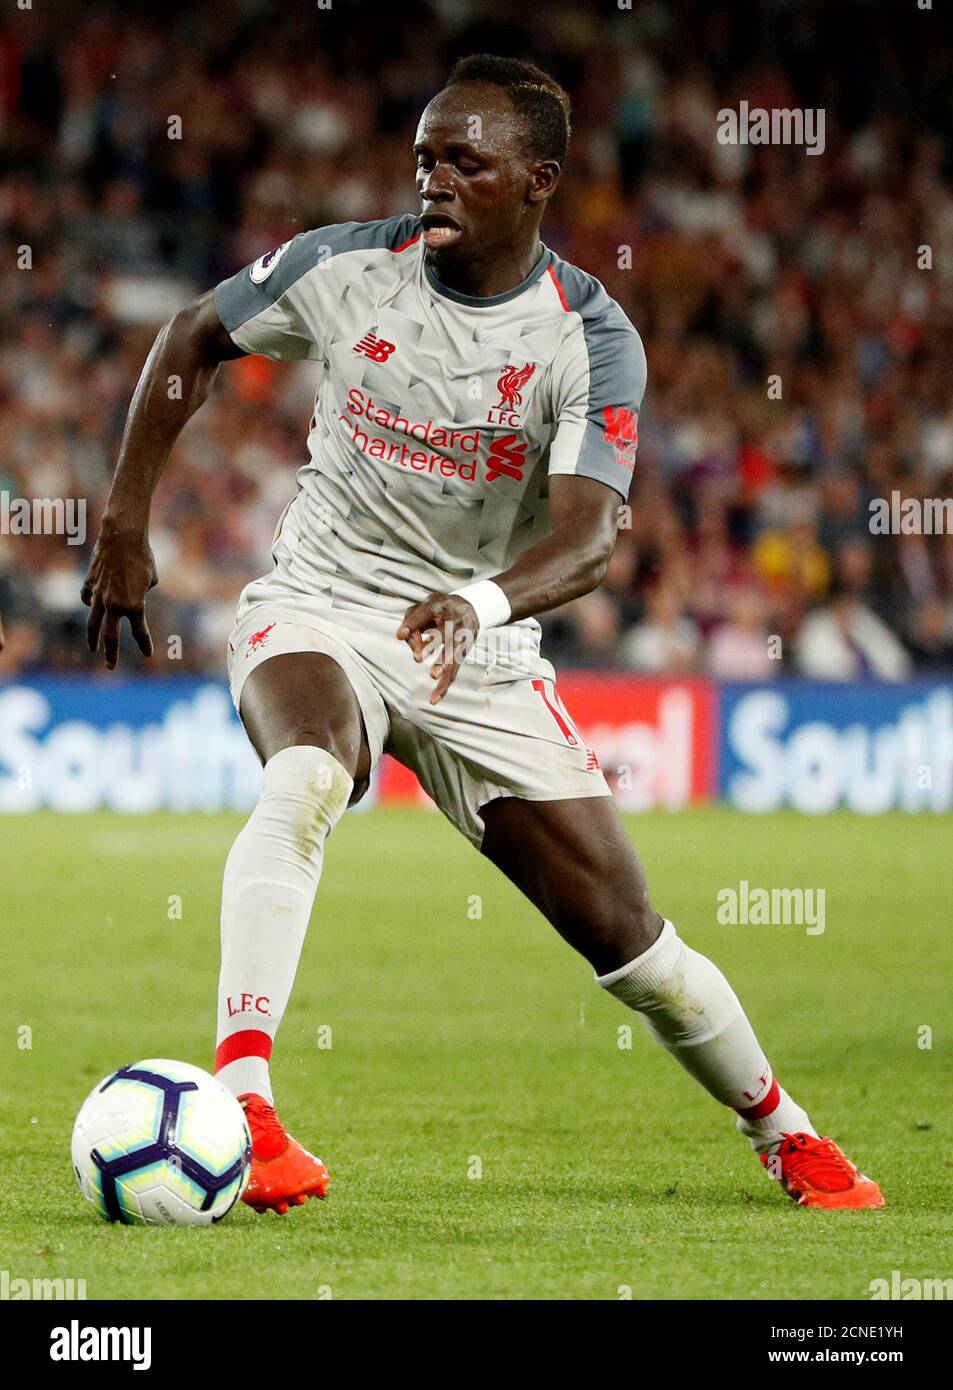 Soccer Football - Premier League - Crystal Palace v Liverpool - Selhurst Park, London, Britain - August 20, 2018 Liverpool's Sadio Mane  Action Images via Reuters/John Sibley  EDITORIAL USE ONLY. No use with unauthorized audio, video, data, fixture lists, club/league logos or 'live' services. Online in-match use limited to 75 images, no video emulation. No use in betting, games or single club/league/player publications.  Please contact your account representative for further details. Stock Photo